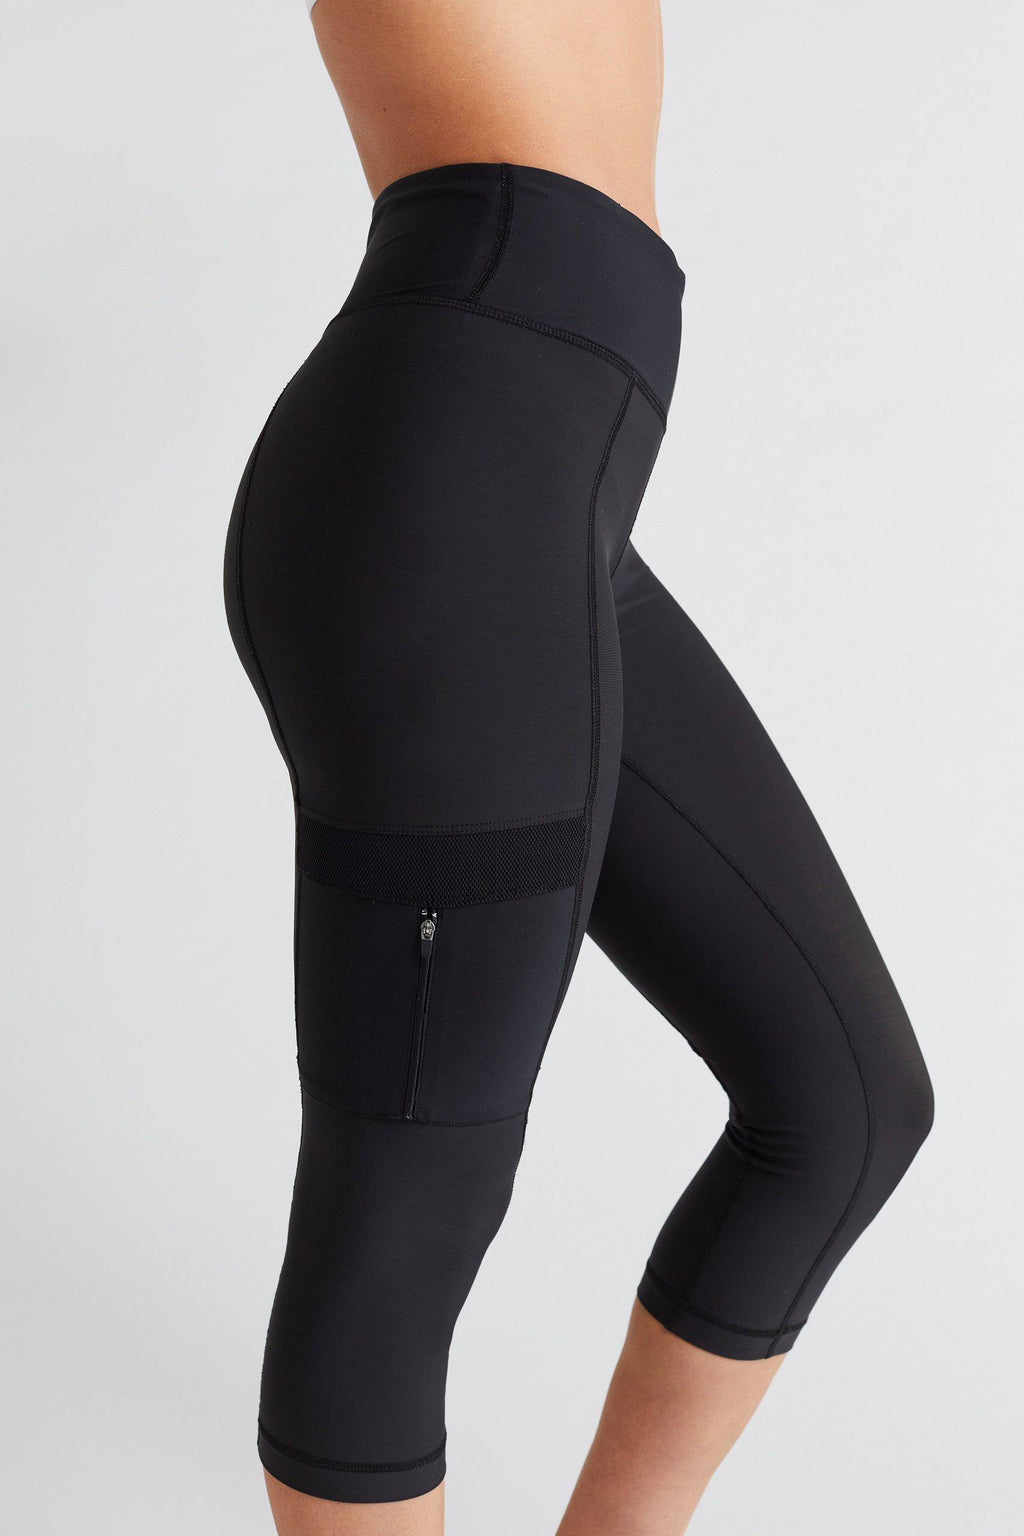 Women's Cargo Leggings with Pocket Black Small at  Women's